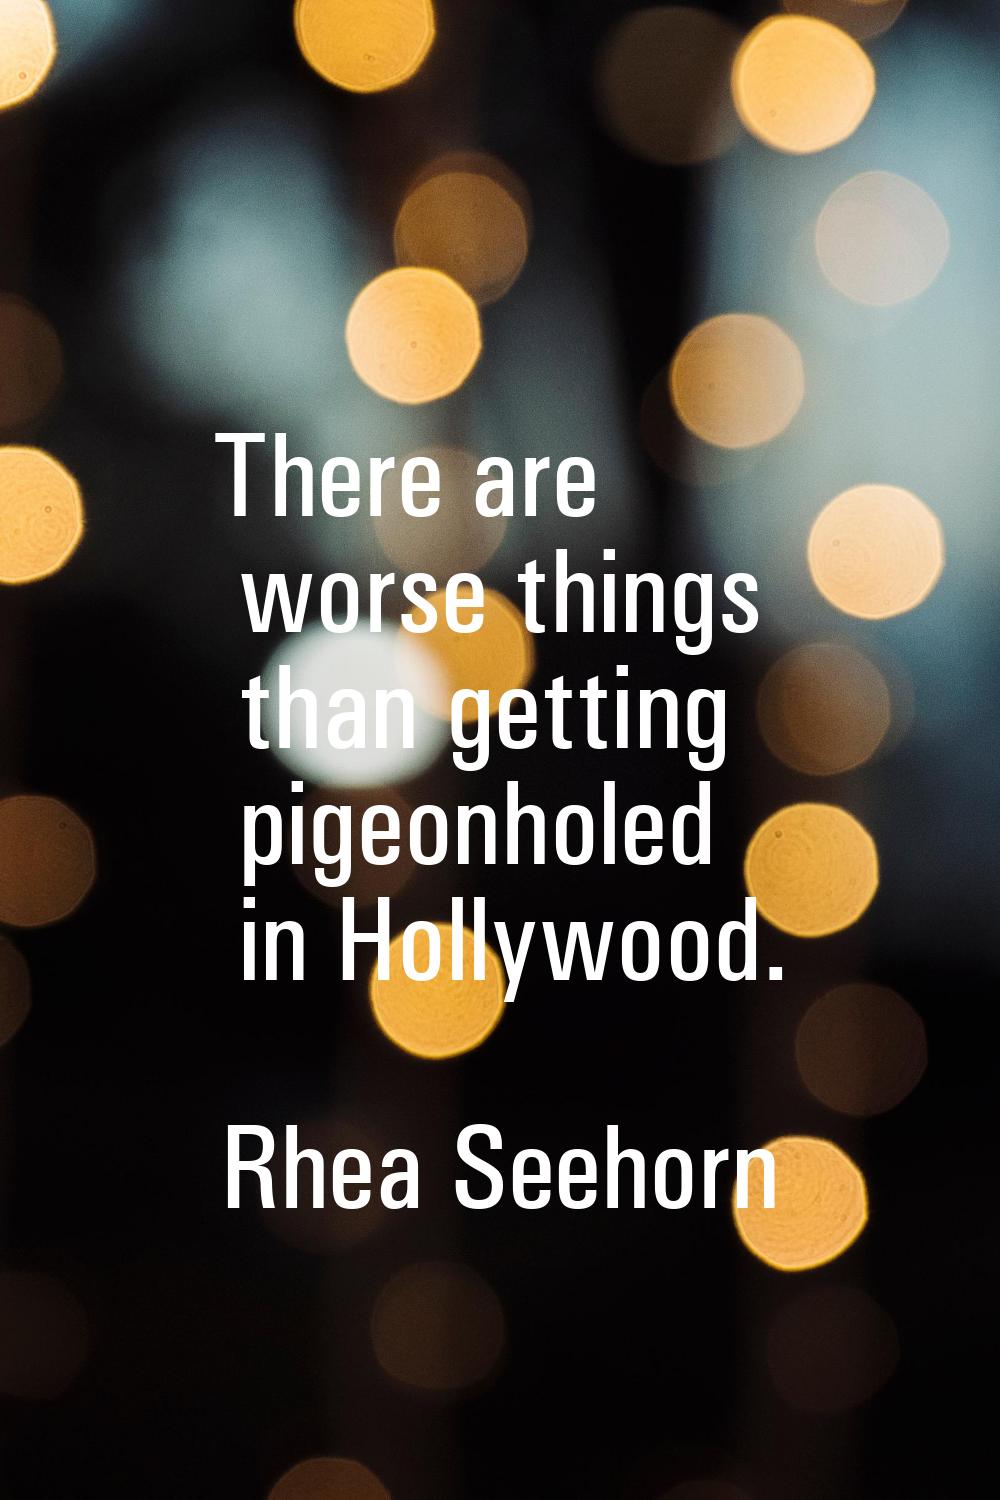 There are worse things than getting pigeonholed in Hollywood.